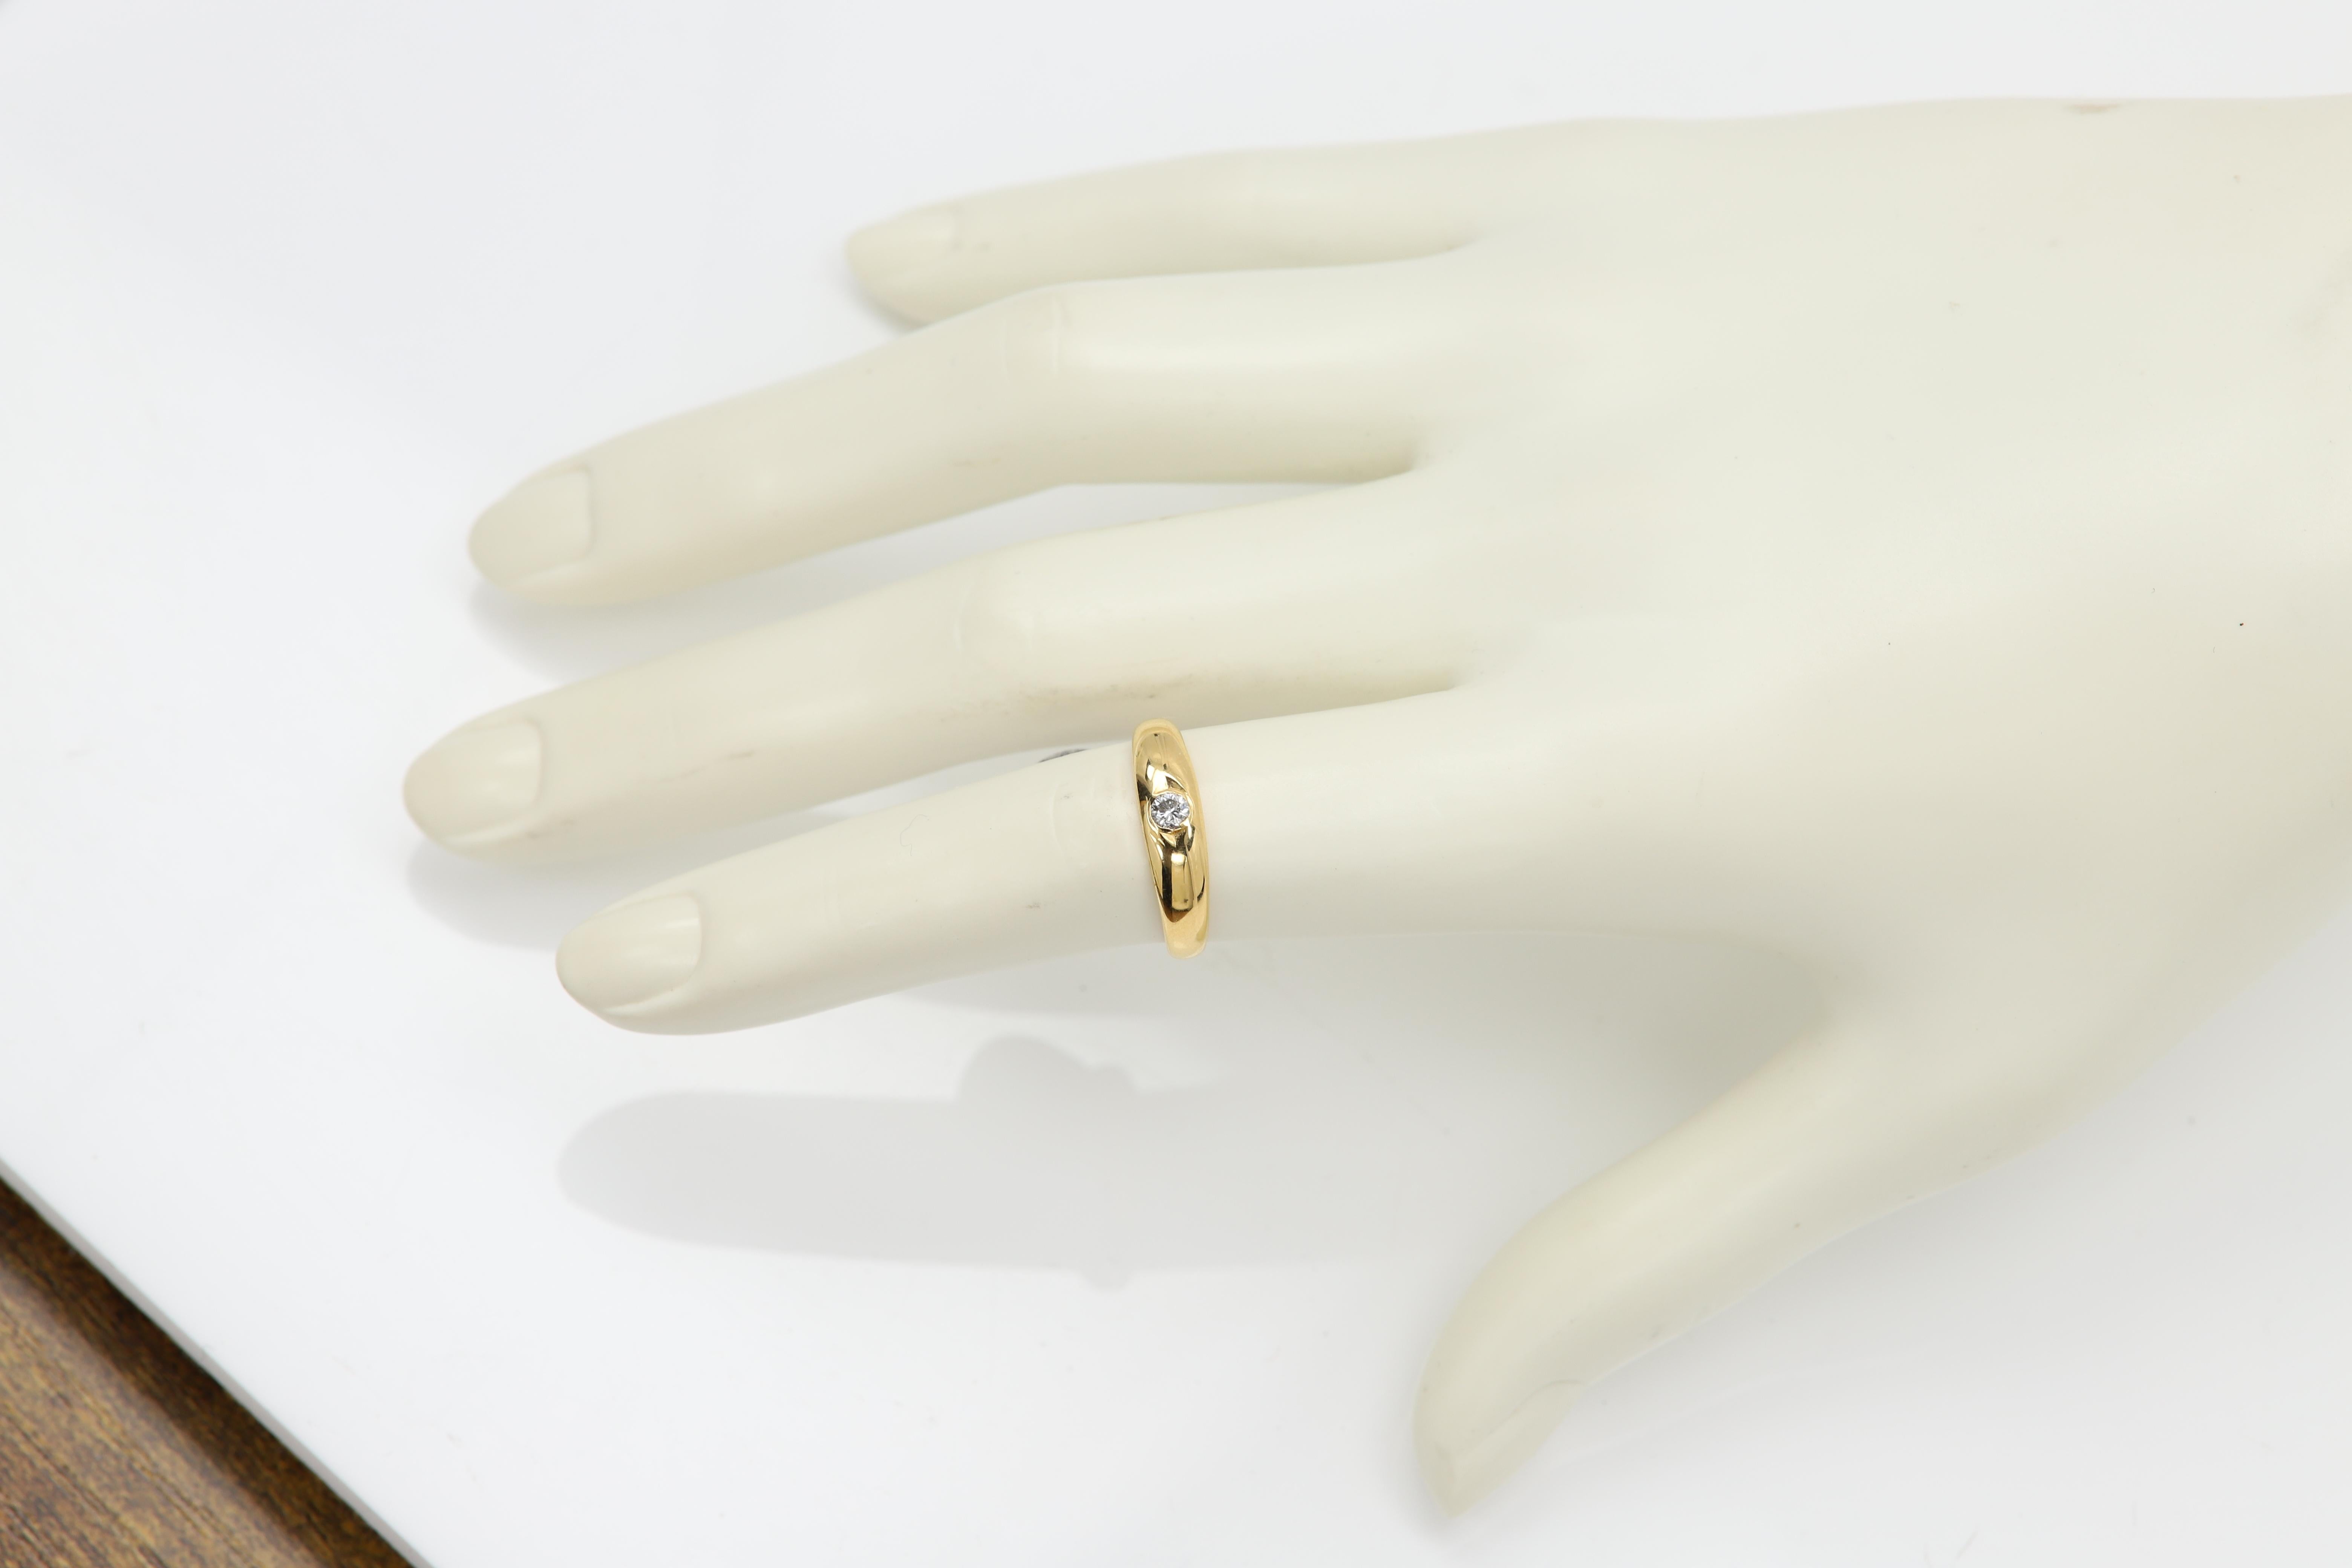 Old Elegant Diamond Wedding Band - in great shape
one center Diamond of 3mm ( about approx 0.15  carat) H-SI
18k Yellow Gold 3.60 grams
Finger Size 5.75
Circa 1940-1950
pre-owned in good condition
The stone is set low inside the metal very similar